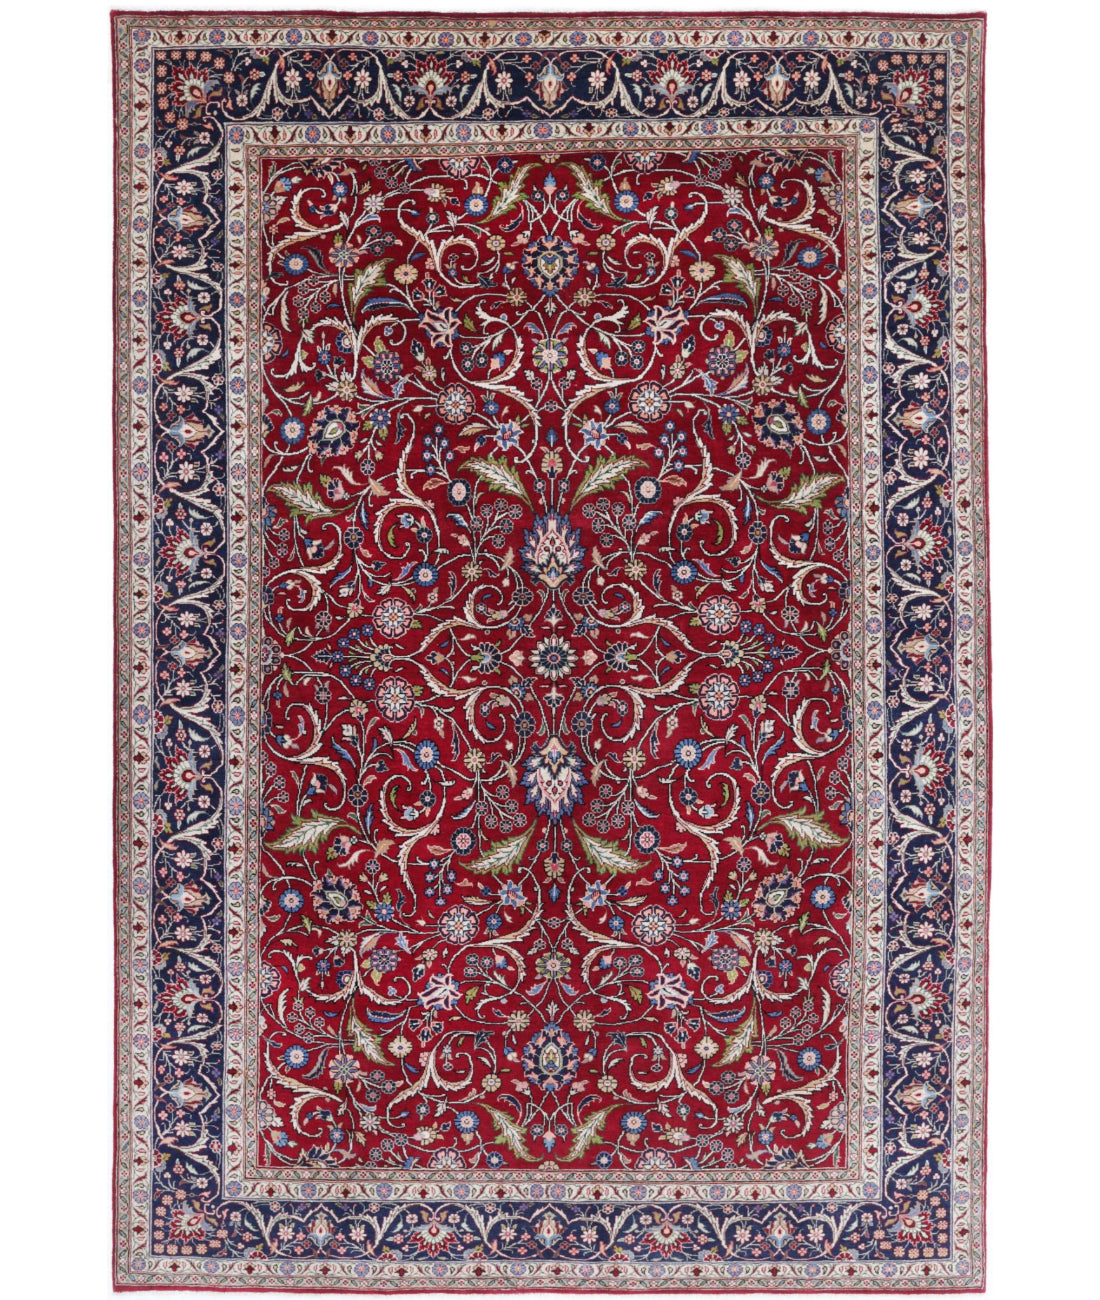 Hand Knotted Persian Tabriz Wool Rug - 6'7'' x 9'11'' 6'7'' x 9'11'' (198 X 298) / Red / Blue